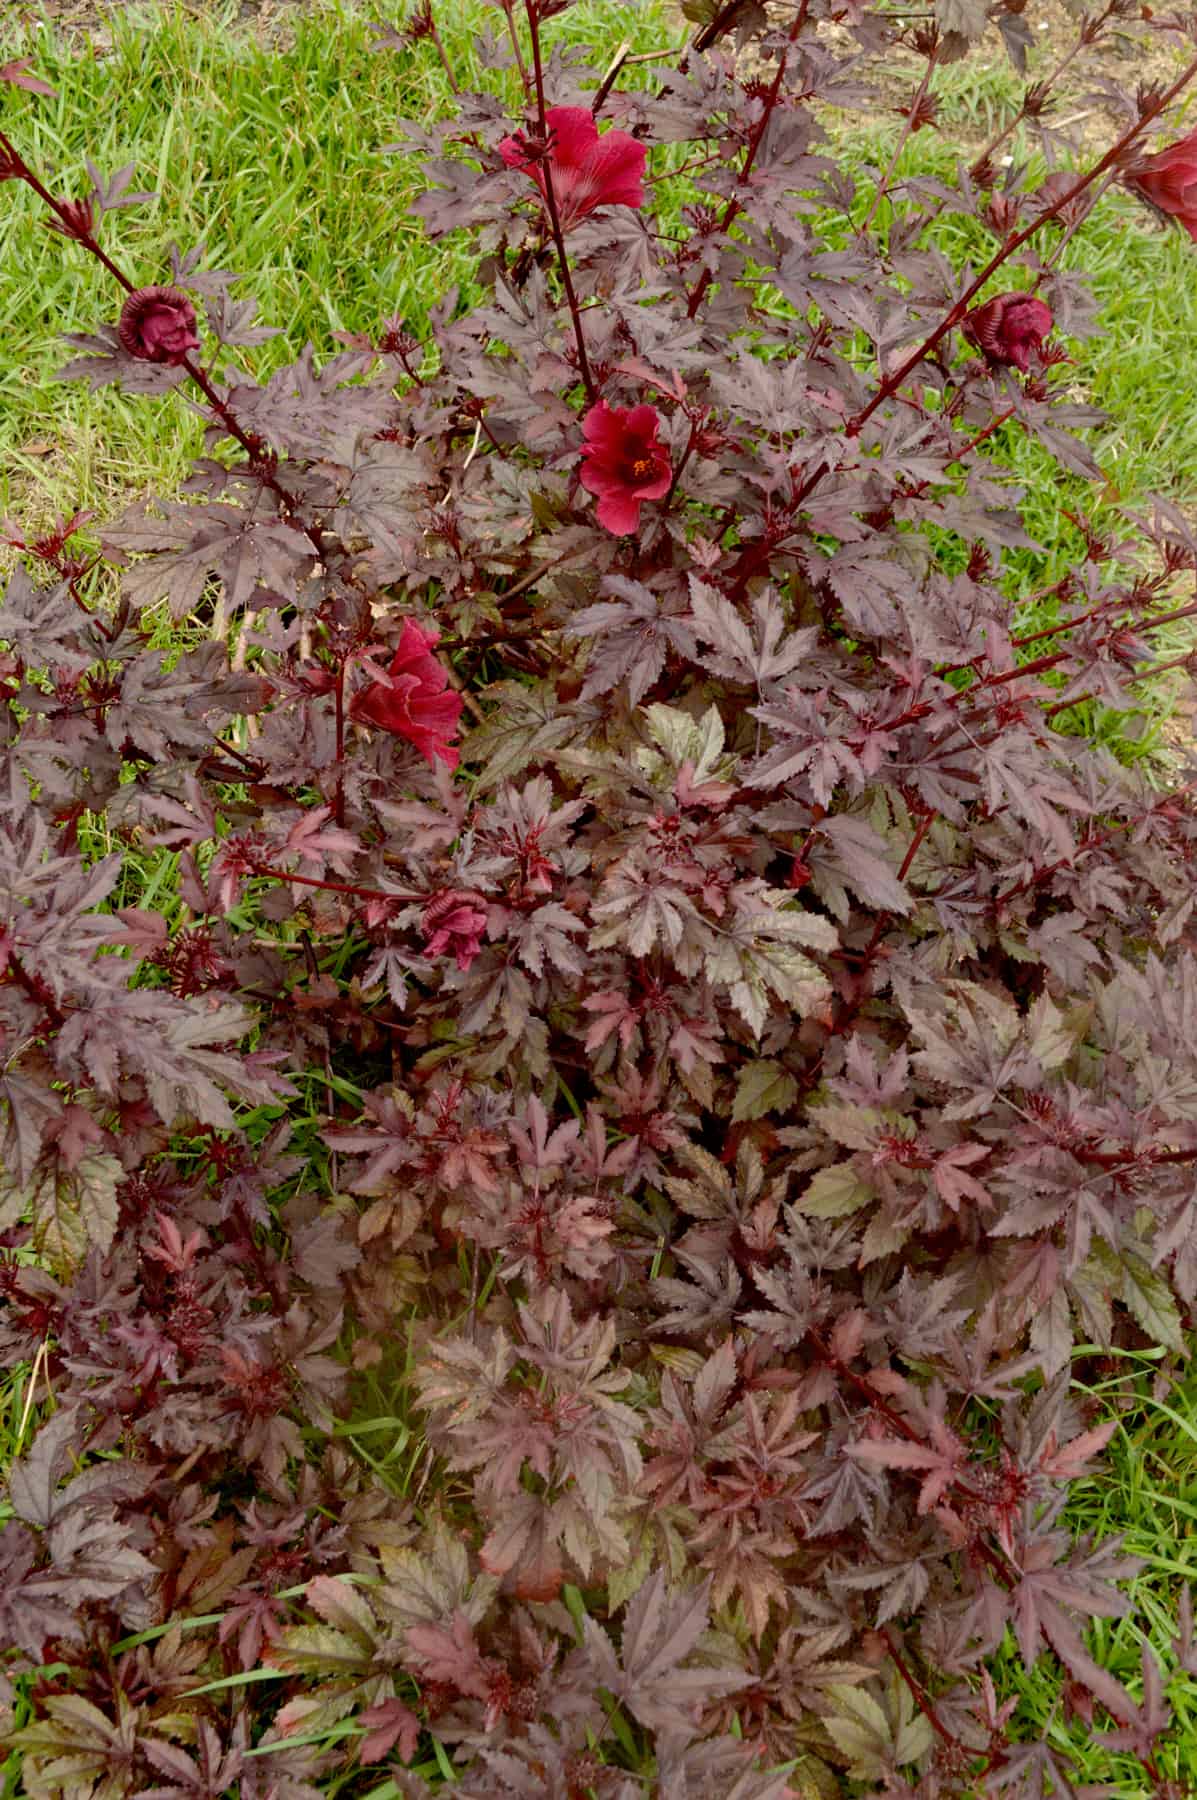 Infrequent red hibiscus blossoms amid the burgundy foliage of Panama Red Hibiscus